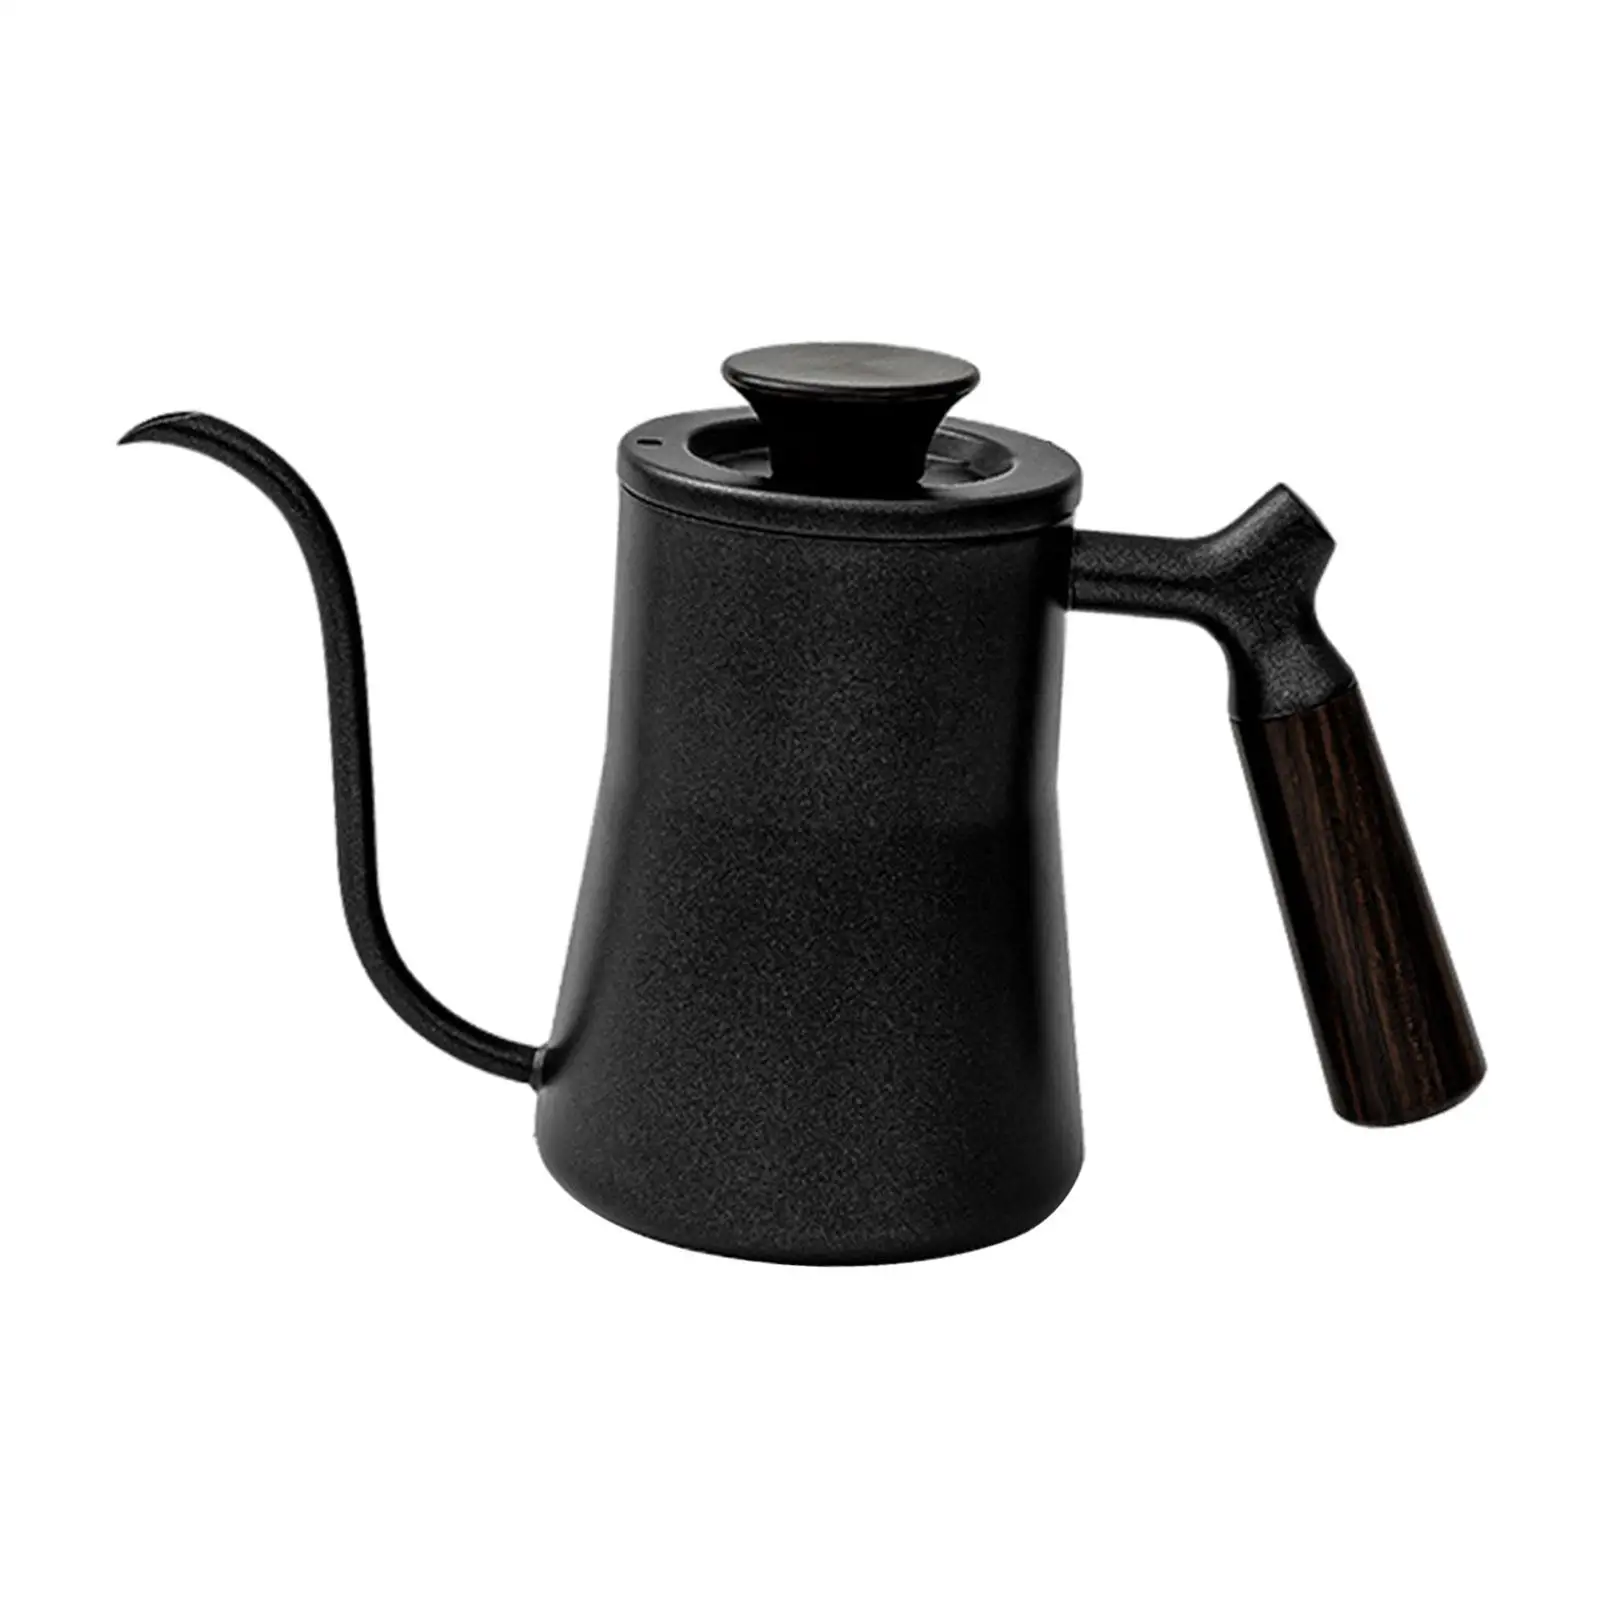 Tea Pot with Wood Handle Lightweight Long Narrow Spout Anti Rust Gooseneck Kettle Pour over Drip Kettle for Office Camping Home